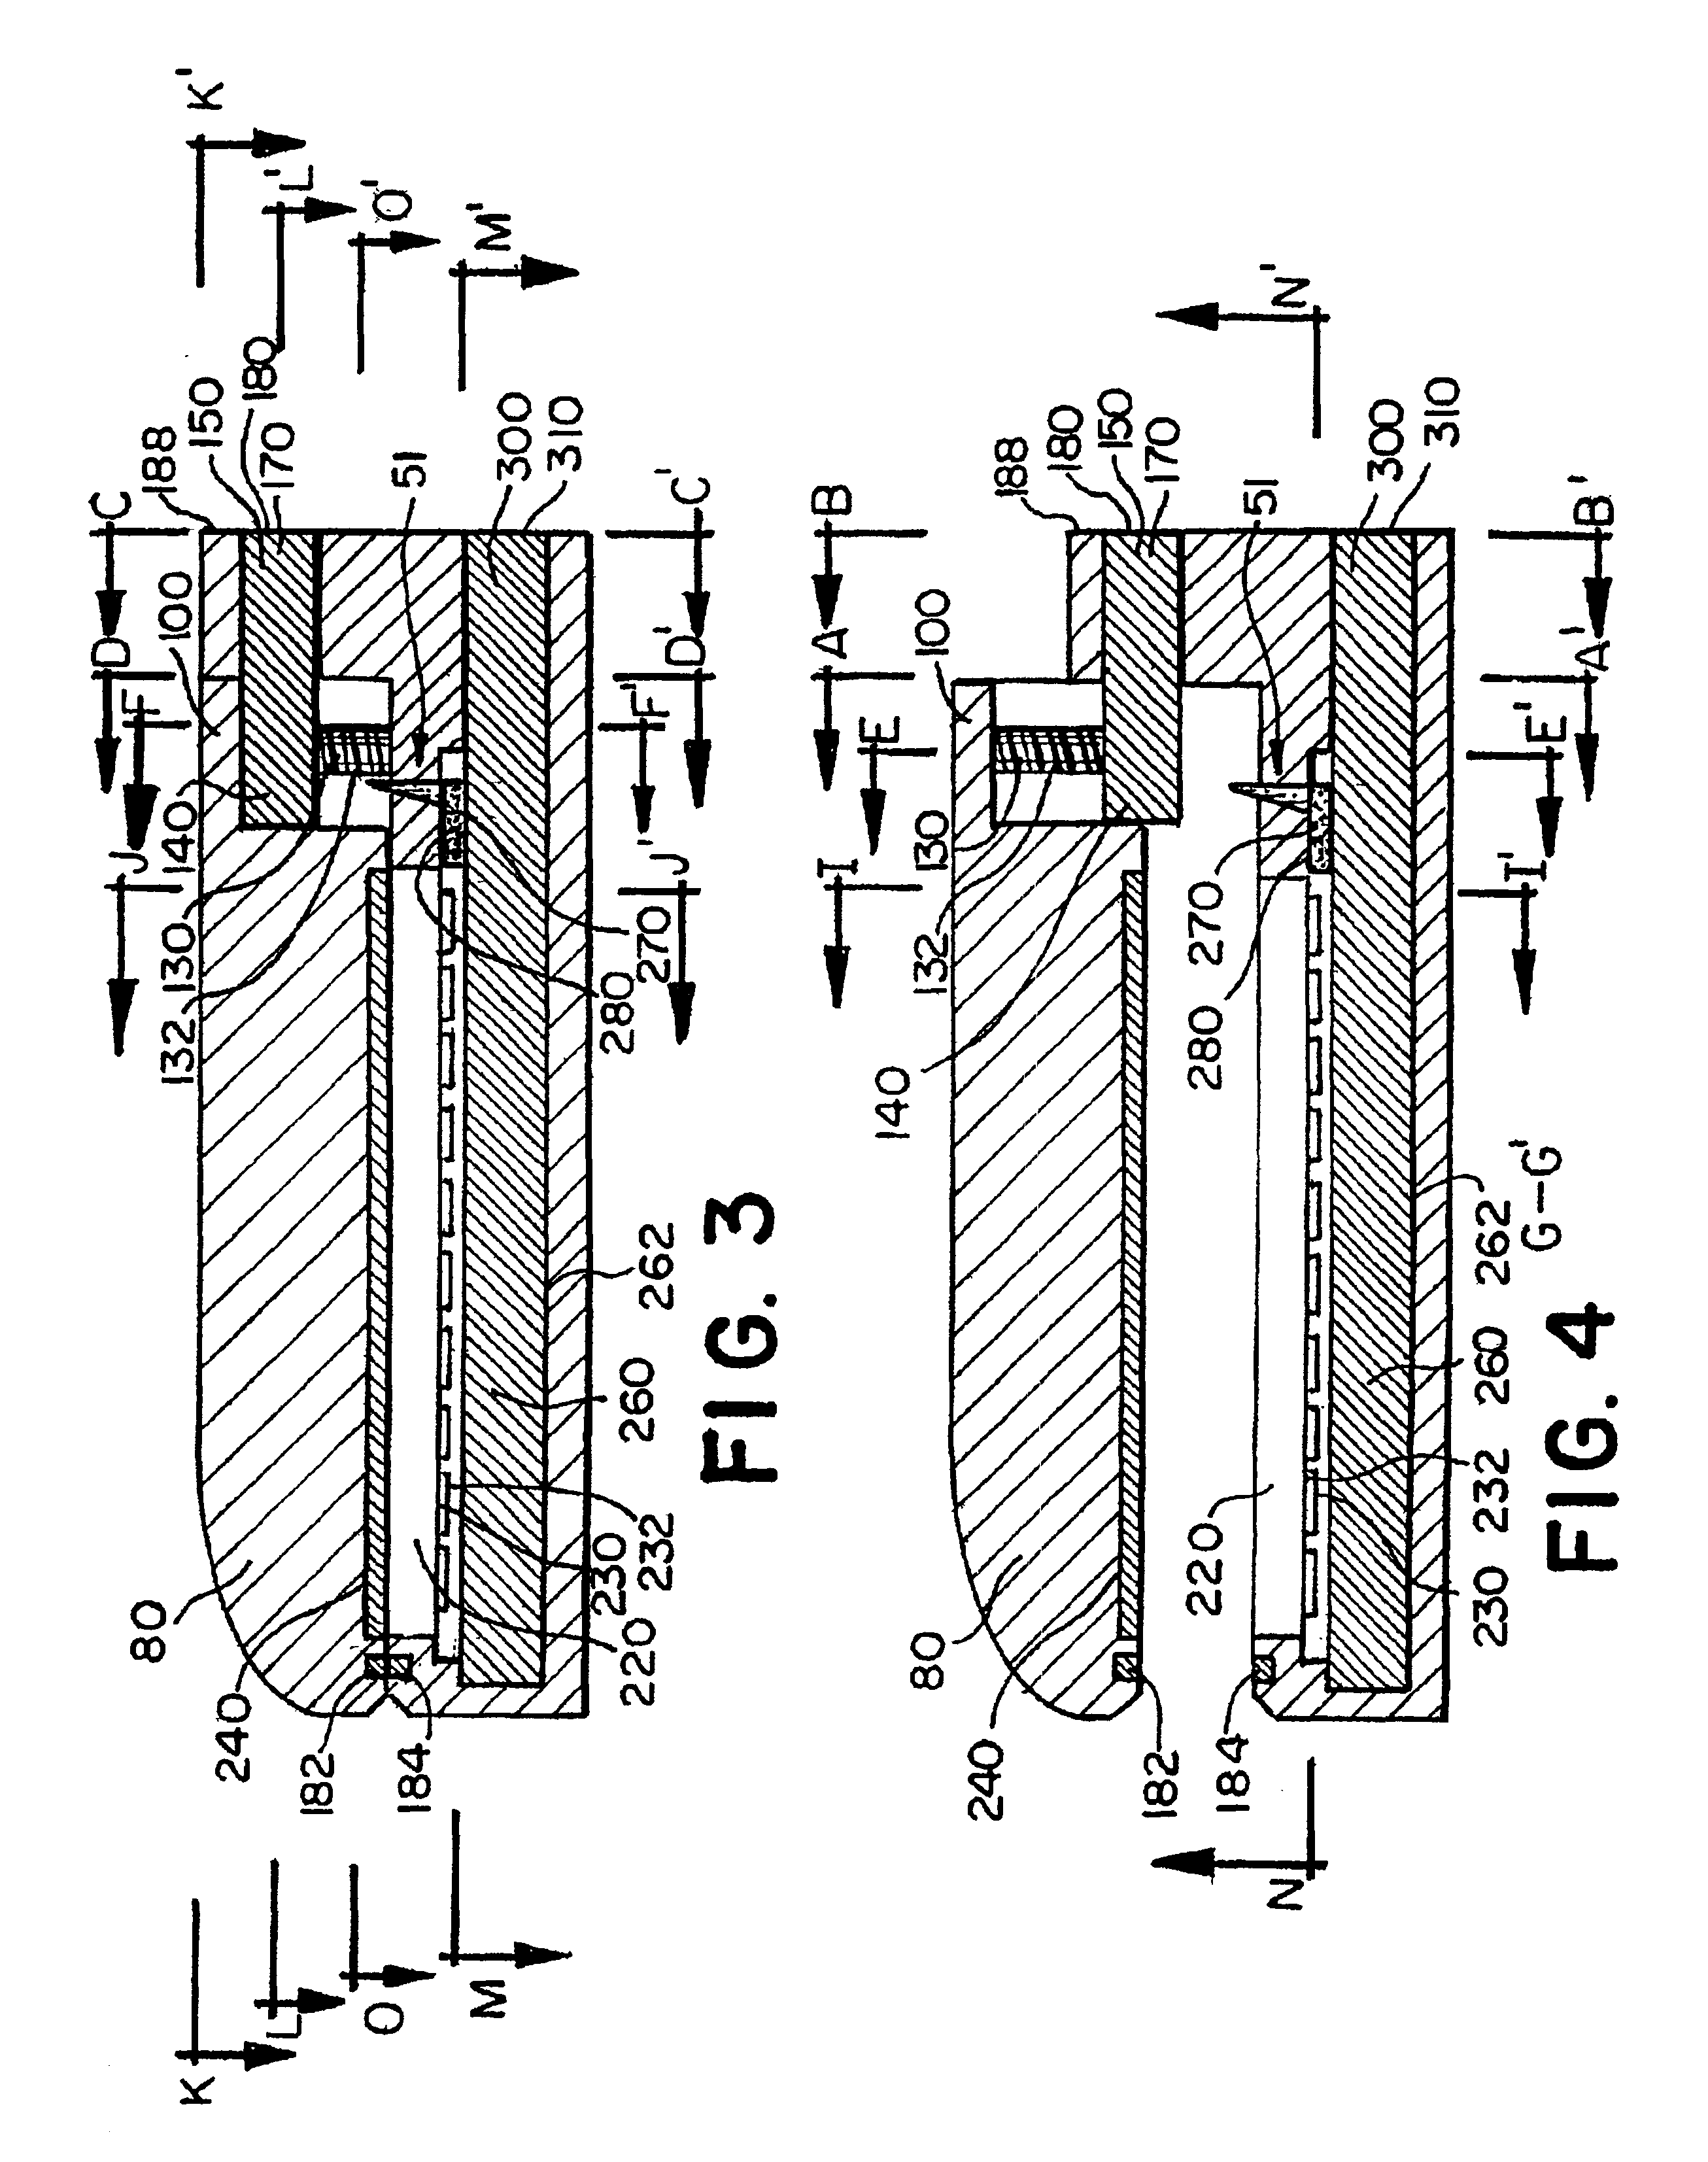 Surgical clamping, cutting and stapling device